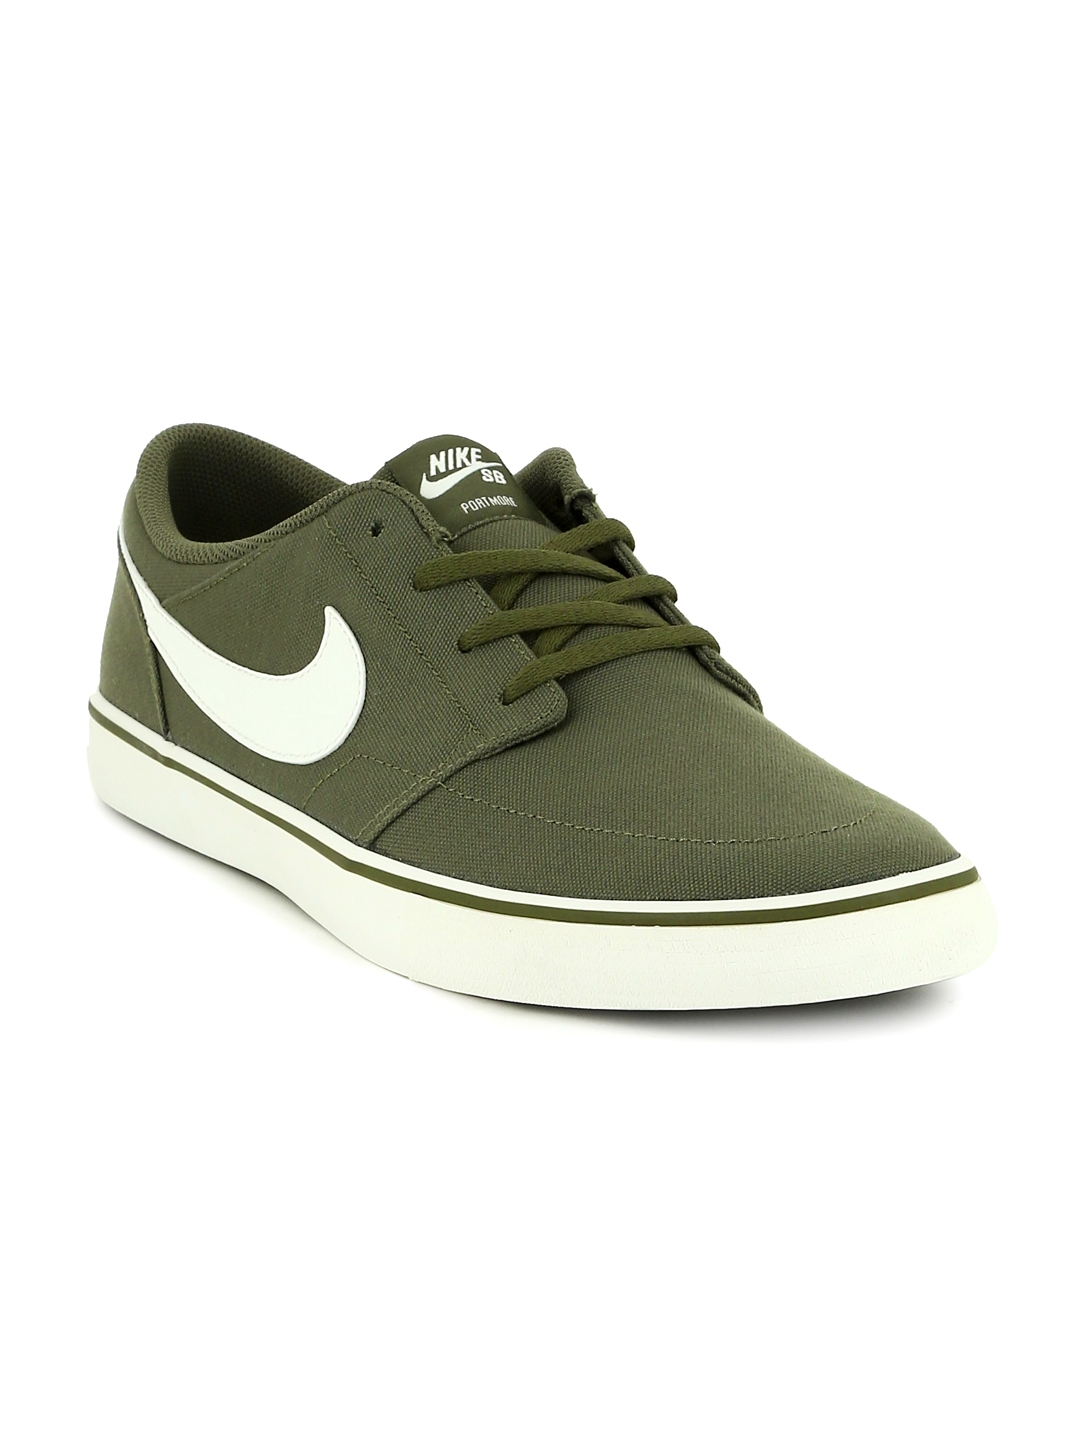 olive green nike shoes